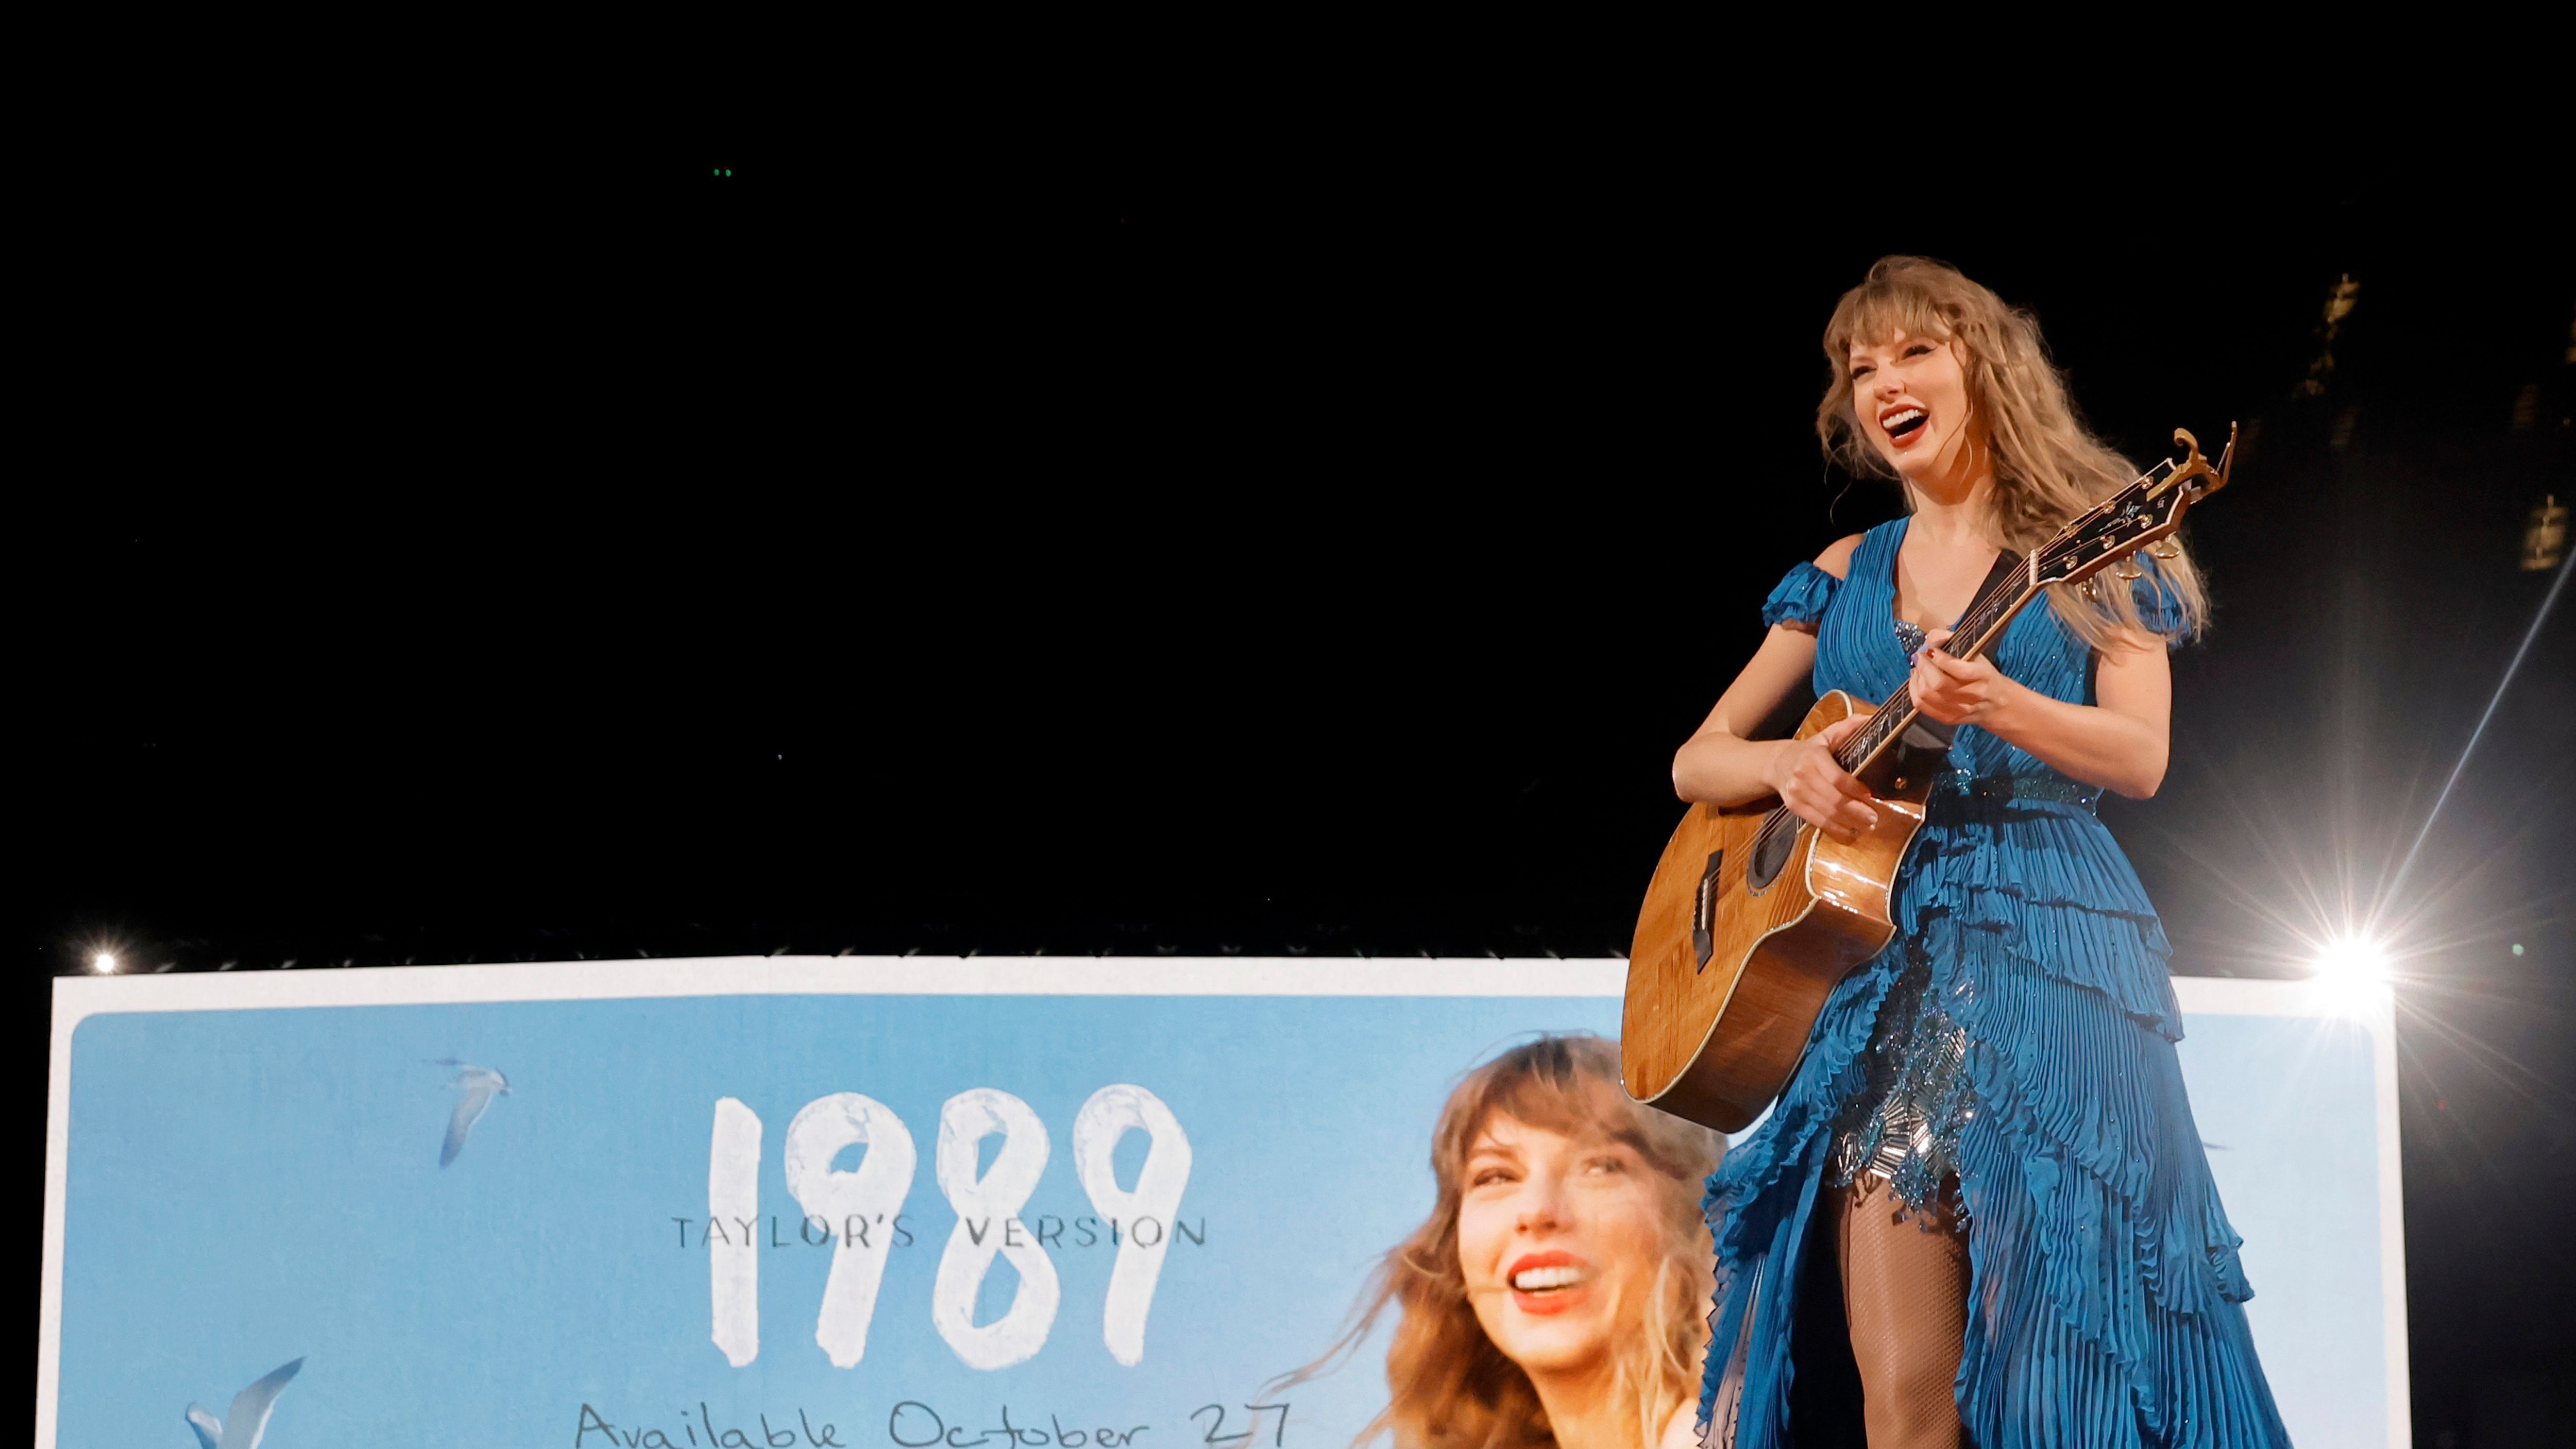 How to play the 1989 (Taylor Swift's Version) song game on Google Search